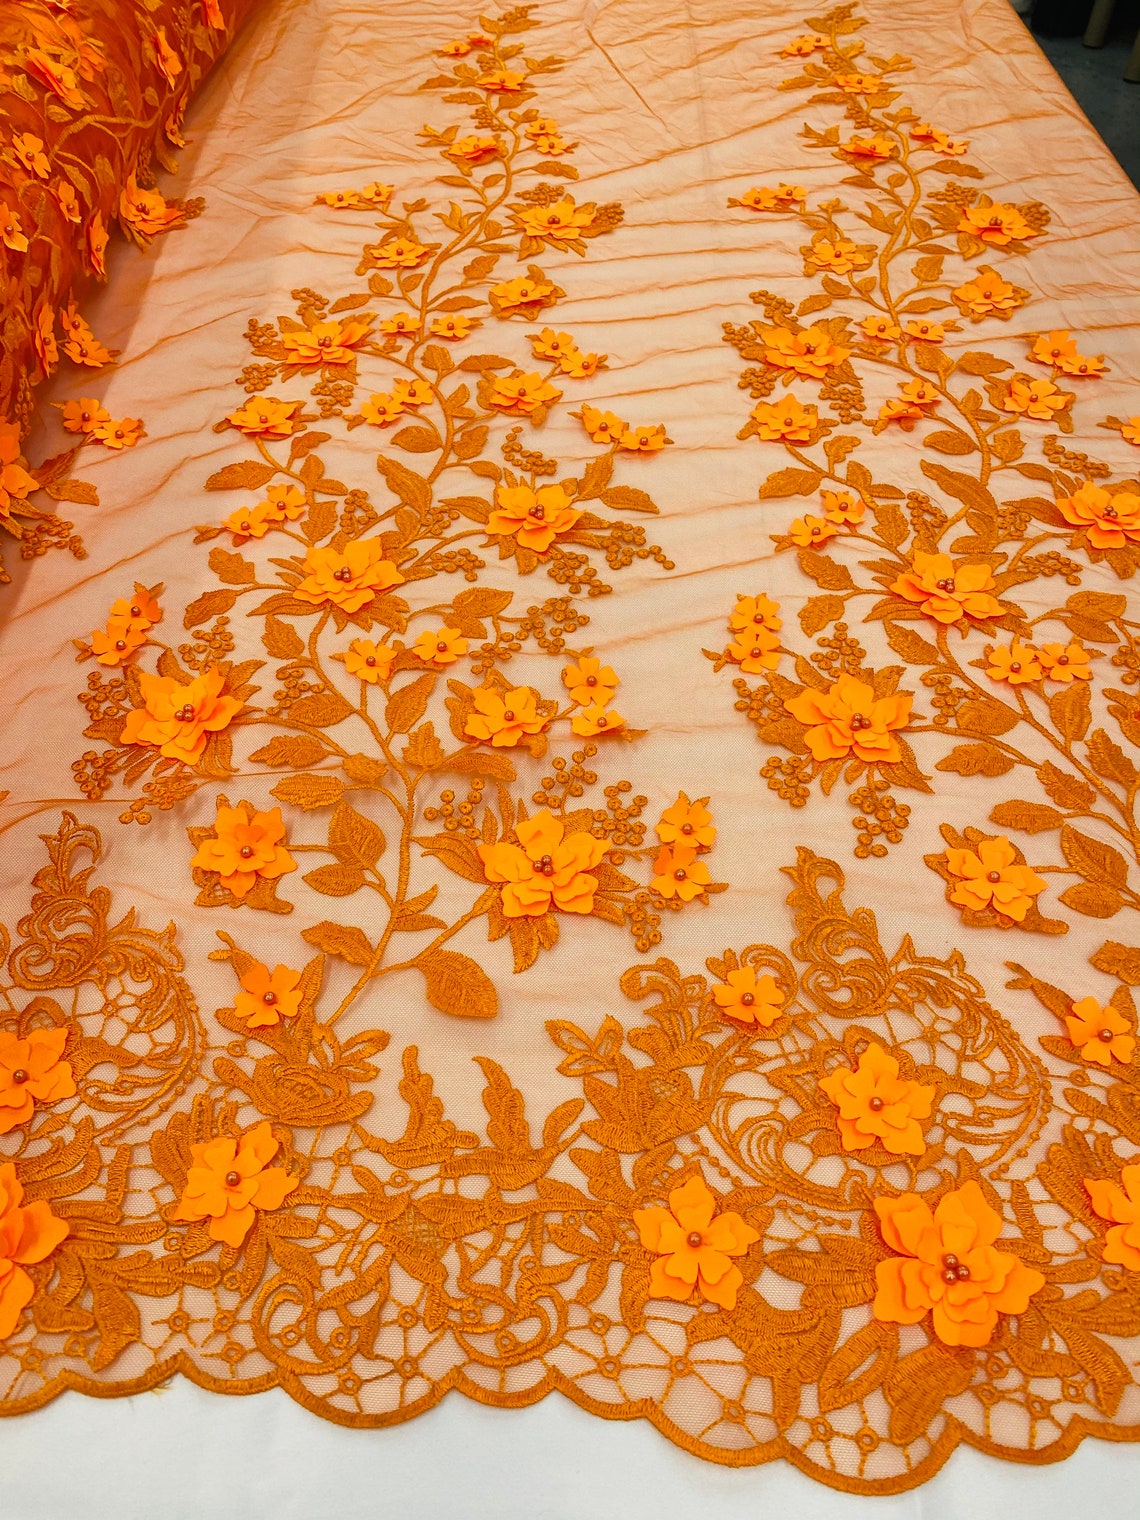 3D Floral Princess Fabric - Orange - Embroidered Floral Lace Fabric with 3D Flowers By Yard